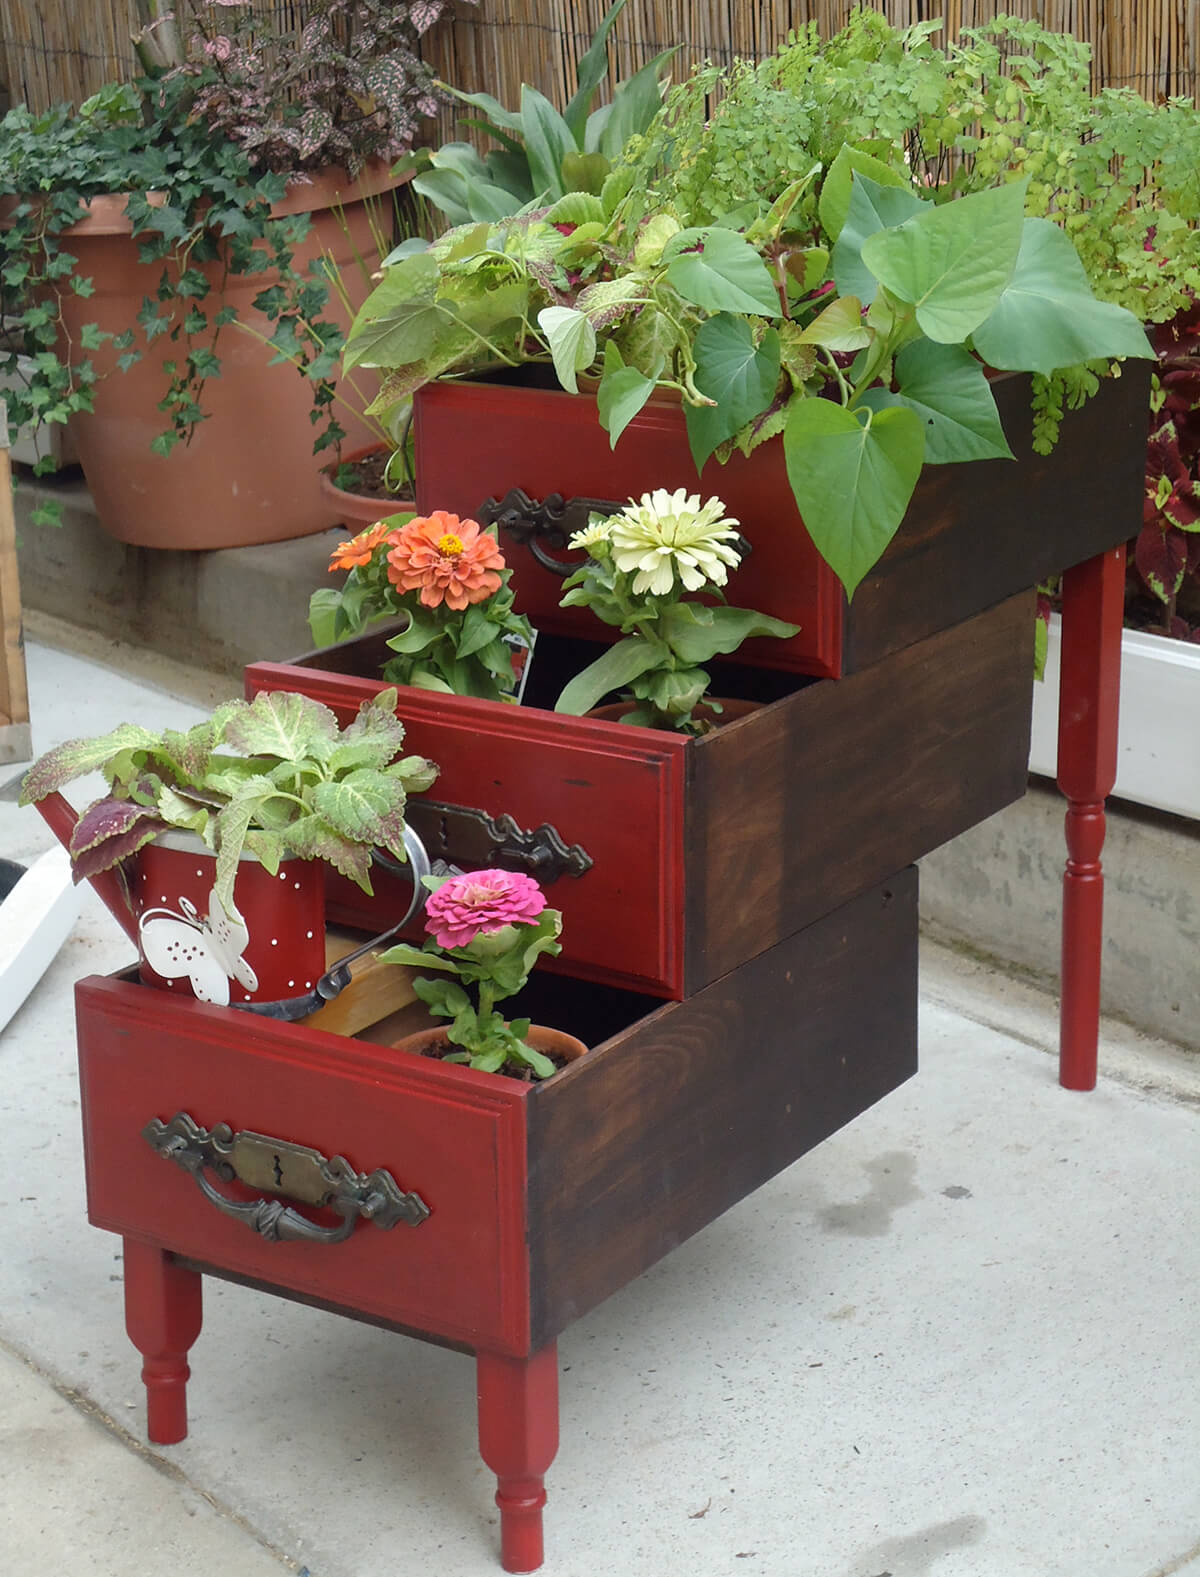 15 Awesome DIY Planter Ideas You Can Make From Everyday Items